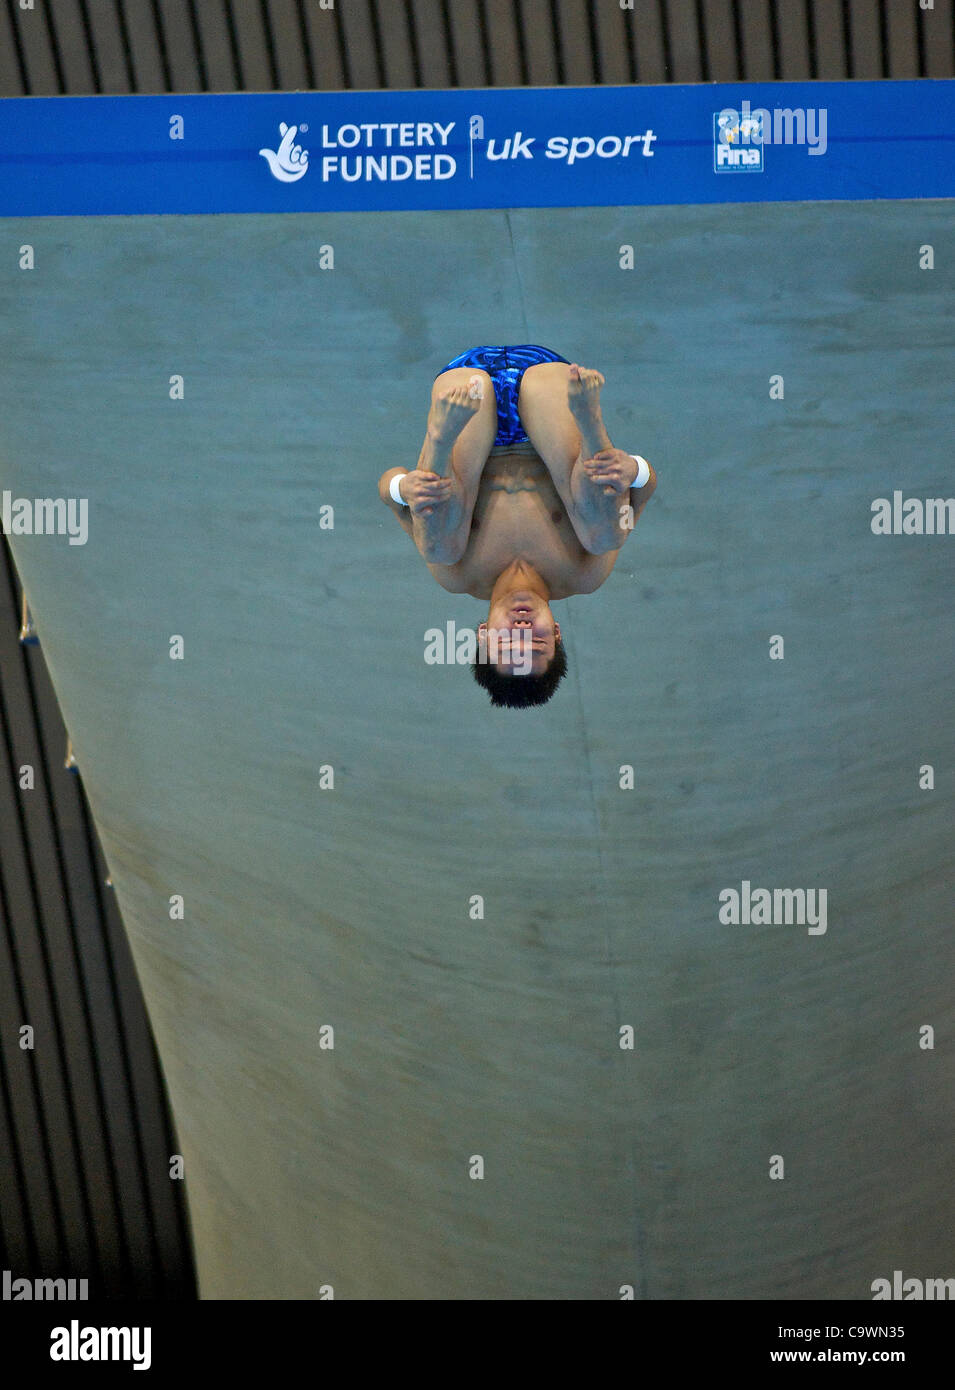 London, England, 12-02-25. QIU BO (CHN) competing in the men's 10m platform semi-finals at the 18th FINA Visa World Cup Diving, Olympic Aquatics Centre. Part of the London Prepares Olympic preparations. Stock Photo